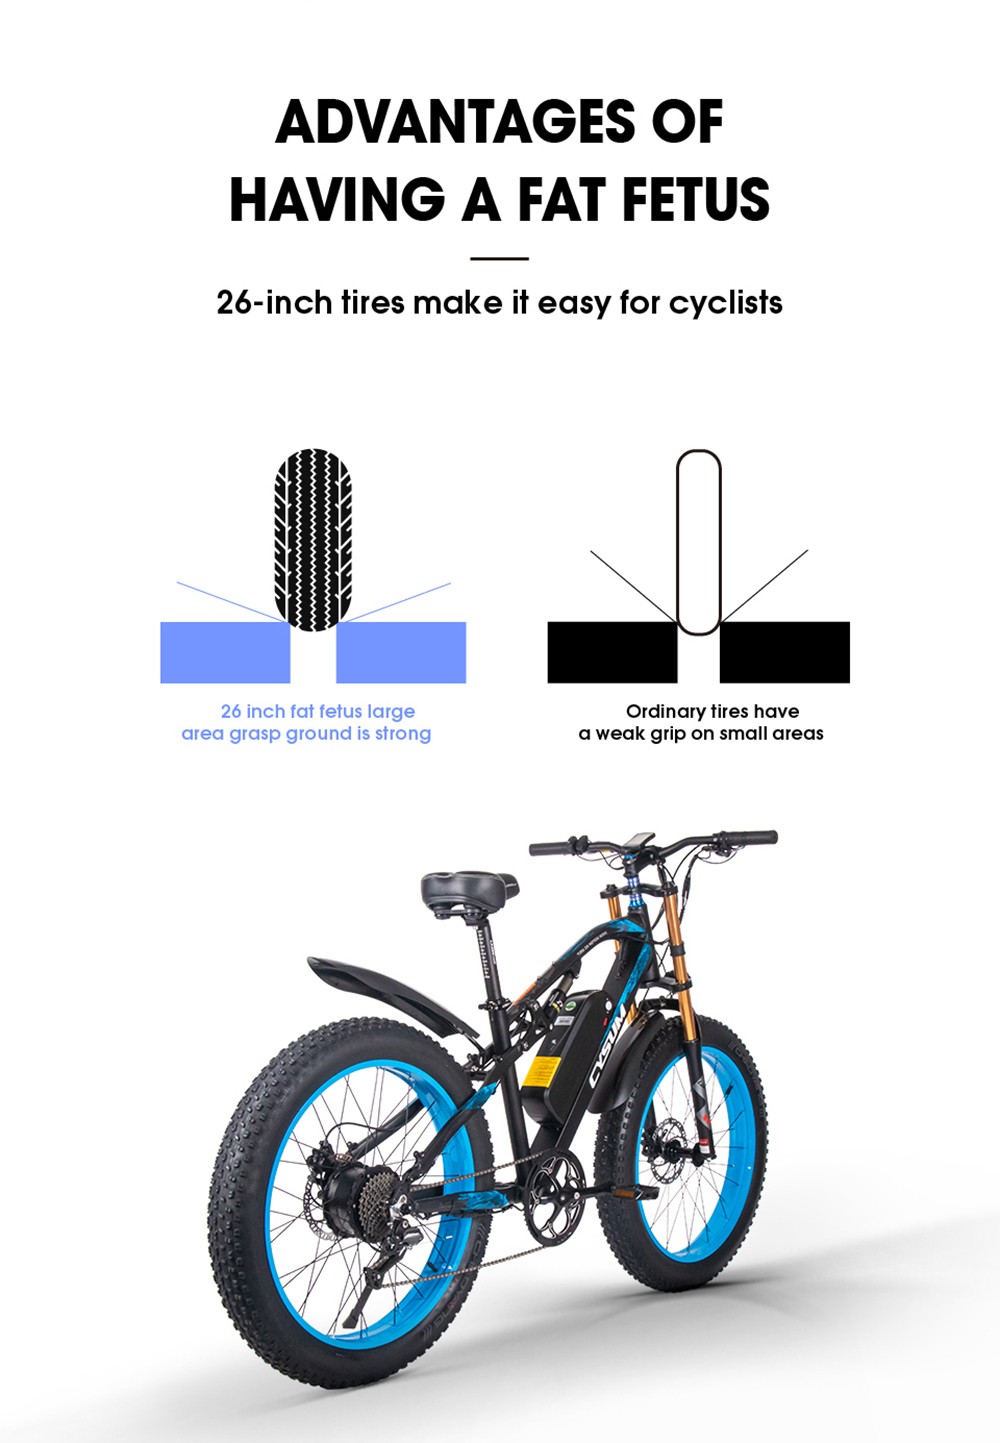 CYSUM M900 Fat Tire Electric Bike 48V 1000W Brushless Gear Motor 17Ah Removable Battery for 50-70 Range - Pure-Black